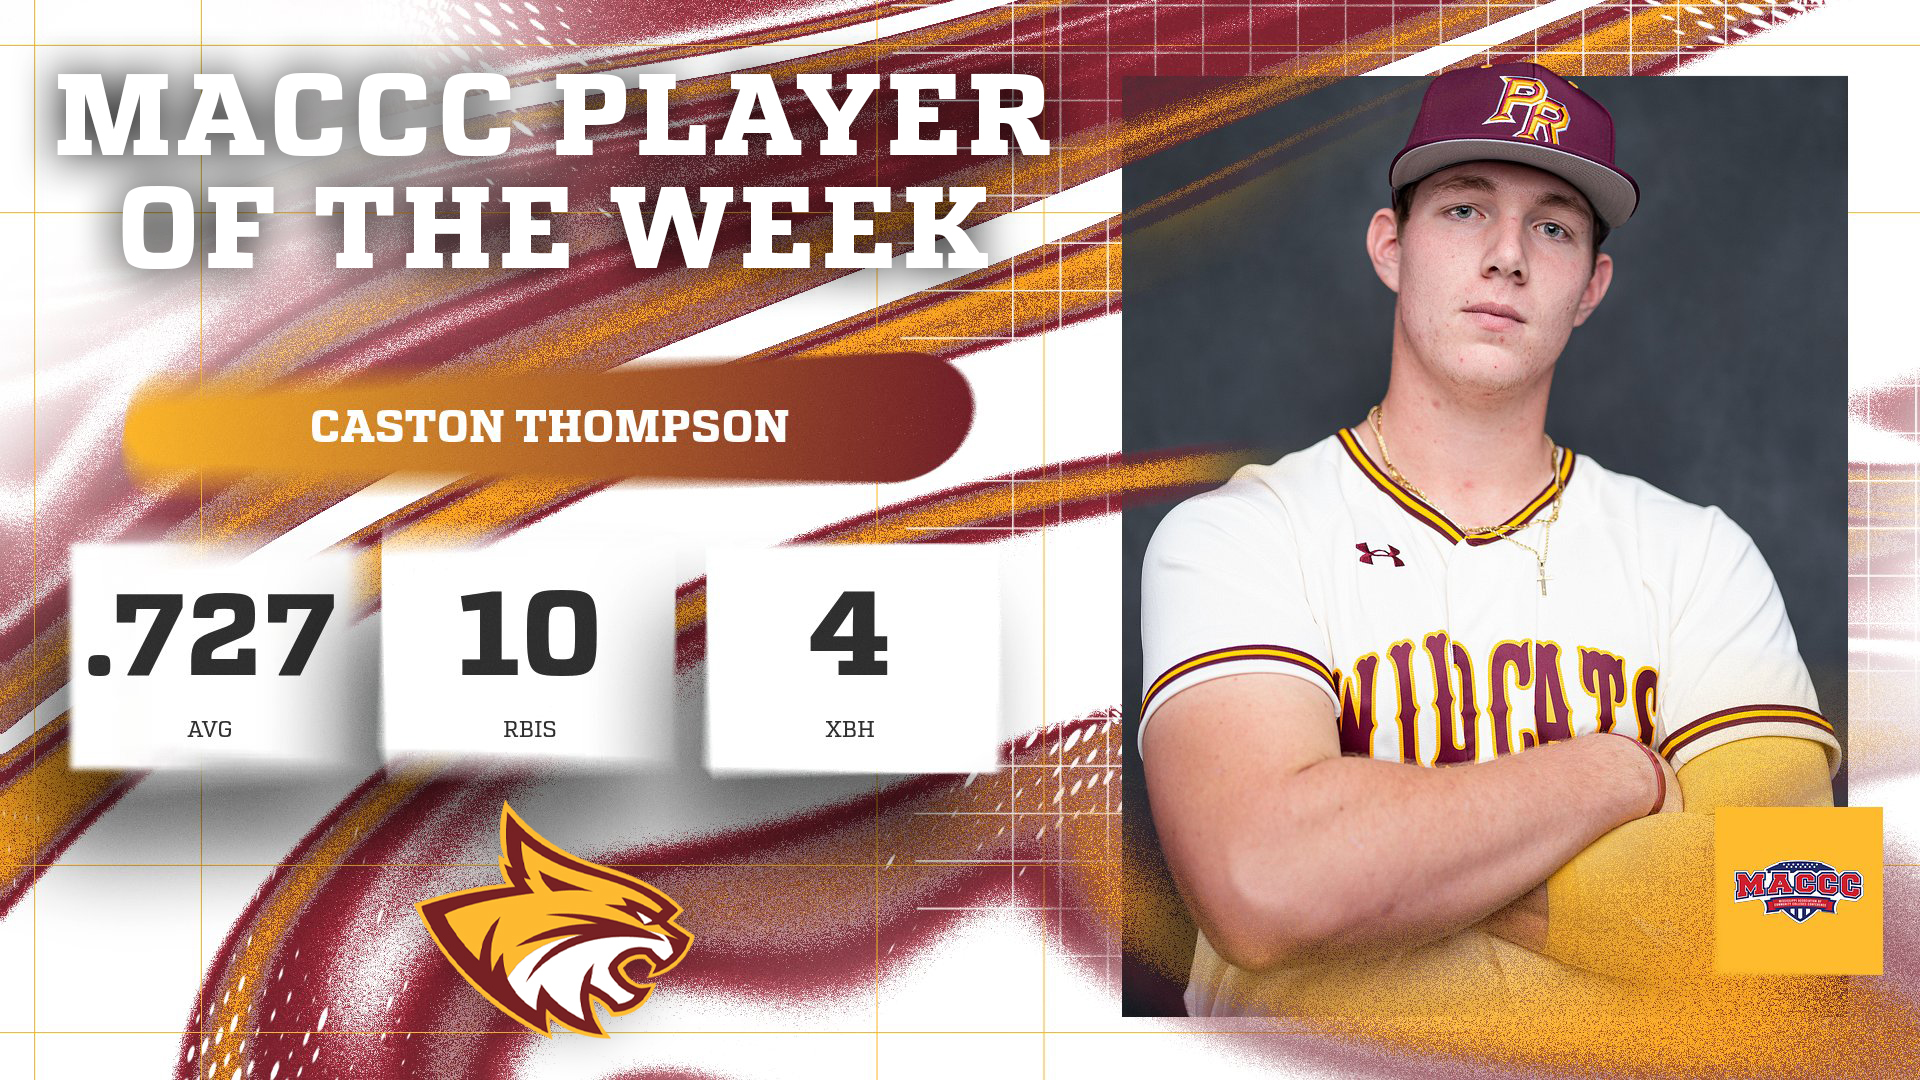 No. 2 Pearl River's Caston Thompson grabs MACCC Player of the Week